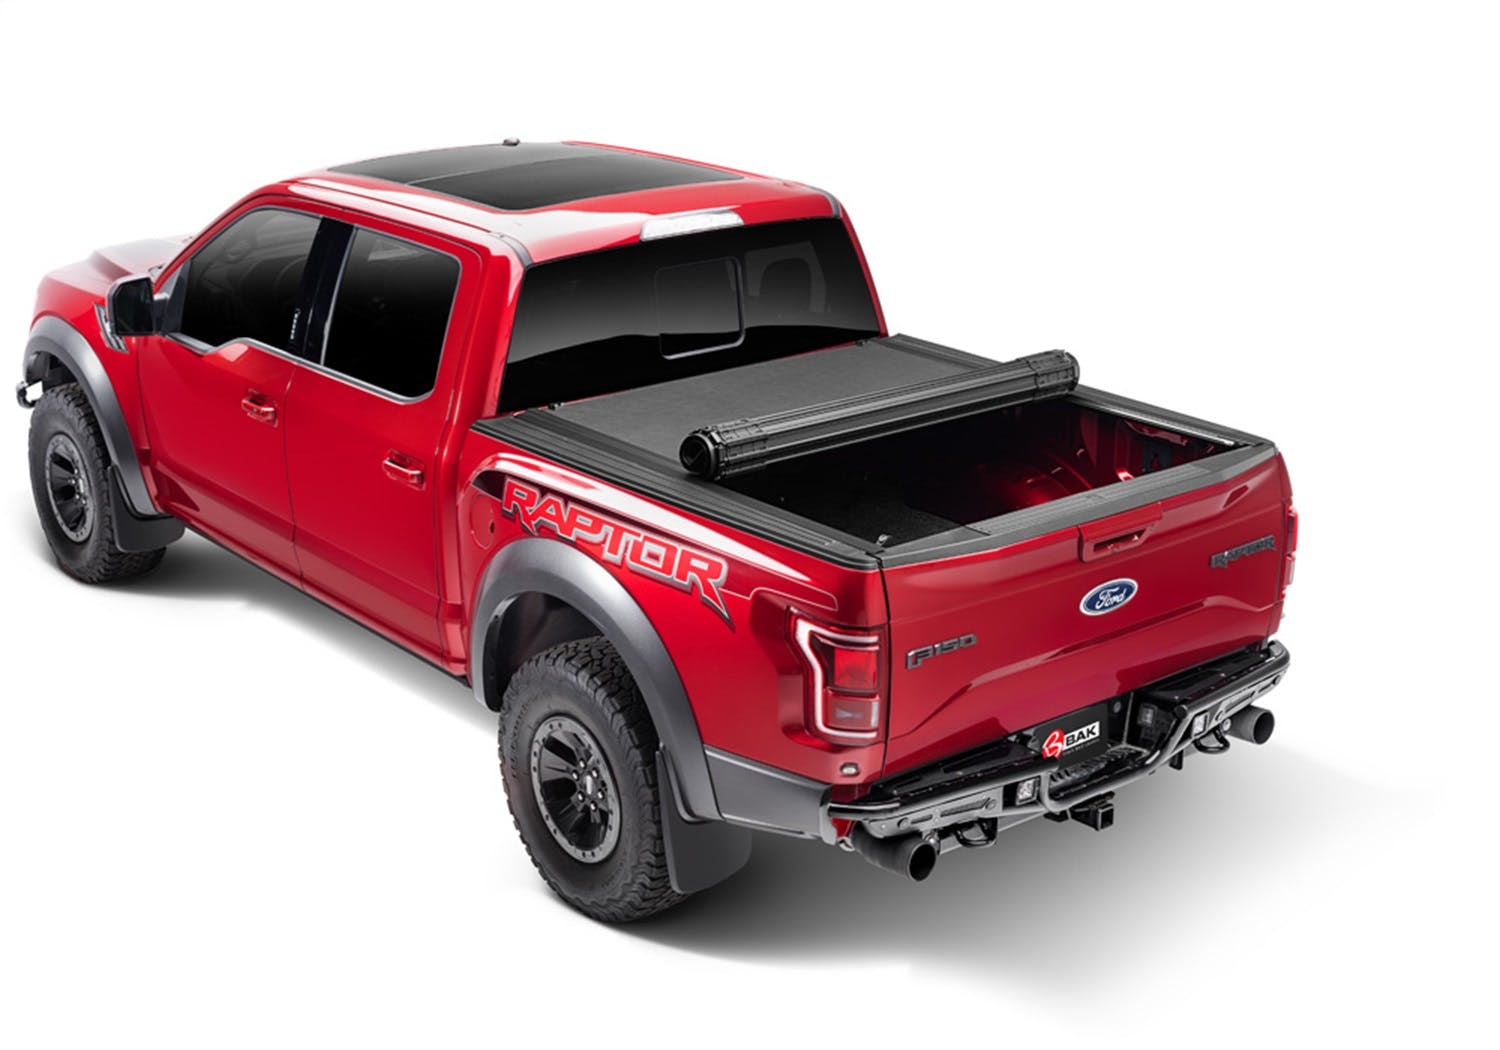 BAK Industries 80307 Revolver X4s Hard Rolling Truck Bed Cover